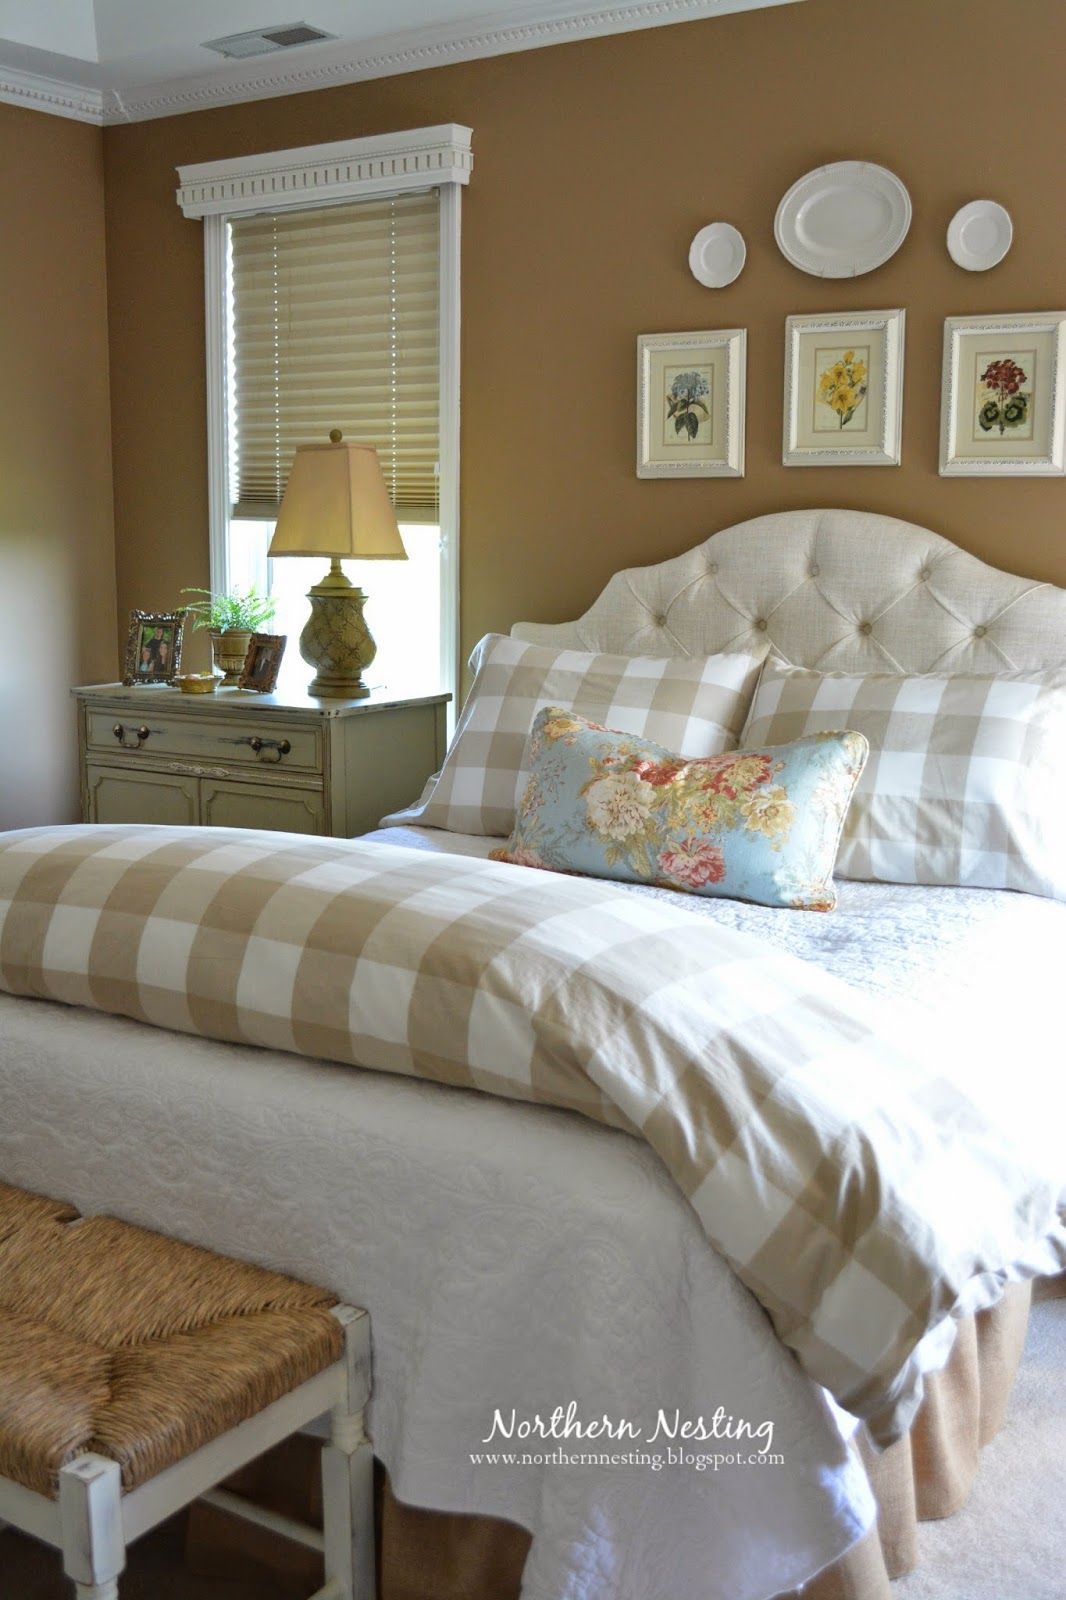 Northern Nesting: The Master Bedroom